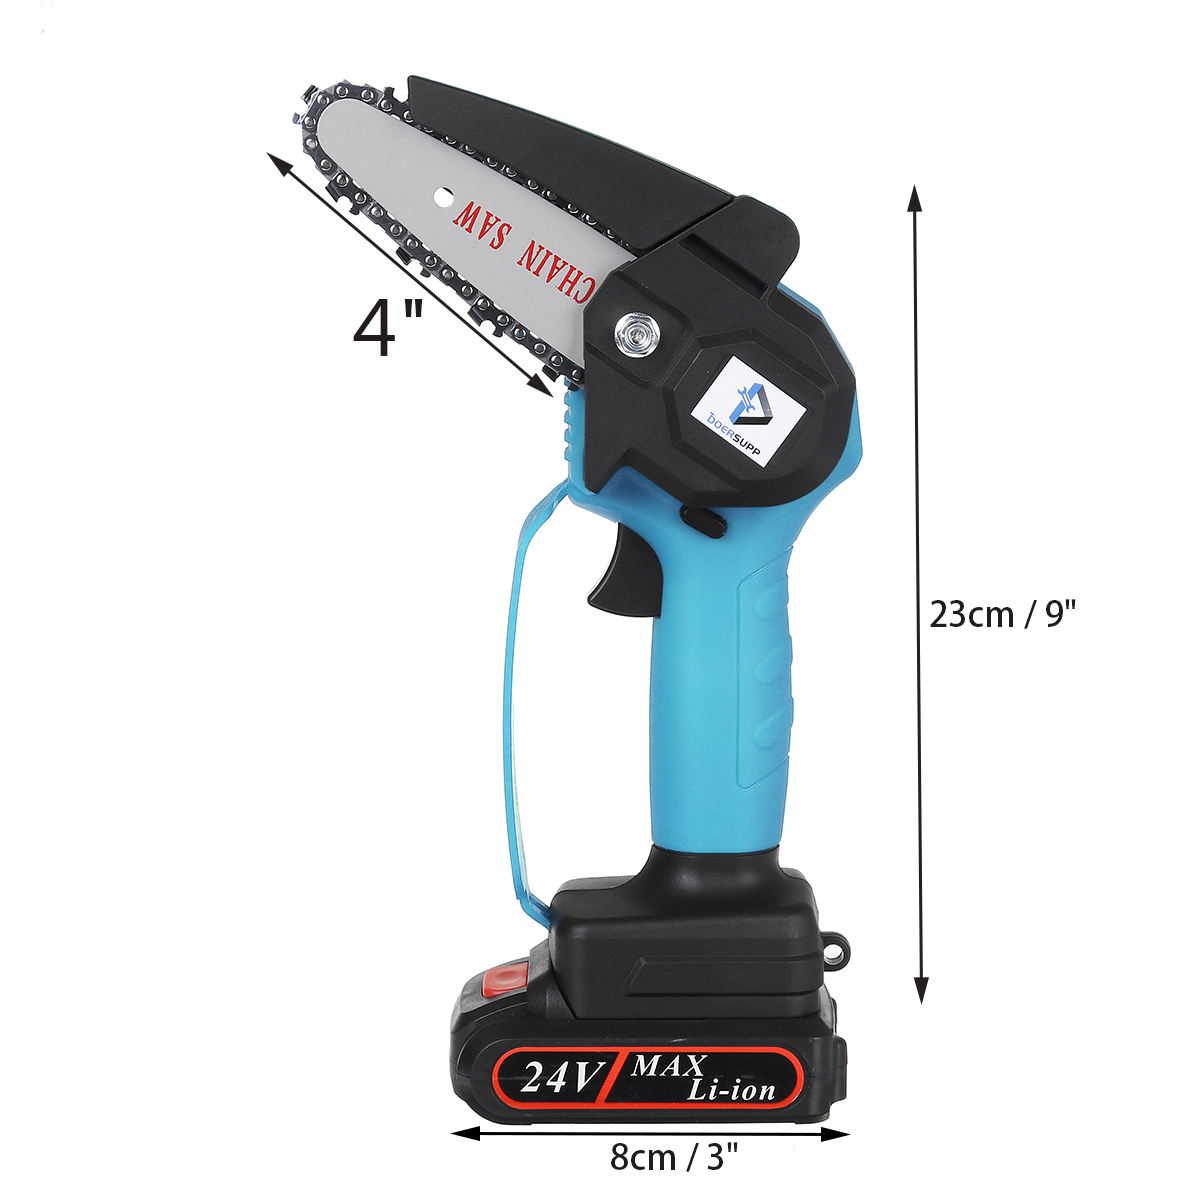 1000W-4Inch-Cordless-Electric-Chain-Saw-Wood-Mini-Cutter-One-Hand-Saw-Woodworking-Tool-W-None1pc-Bat-1833244-16